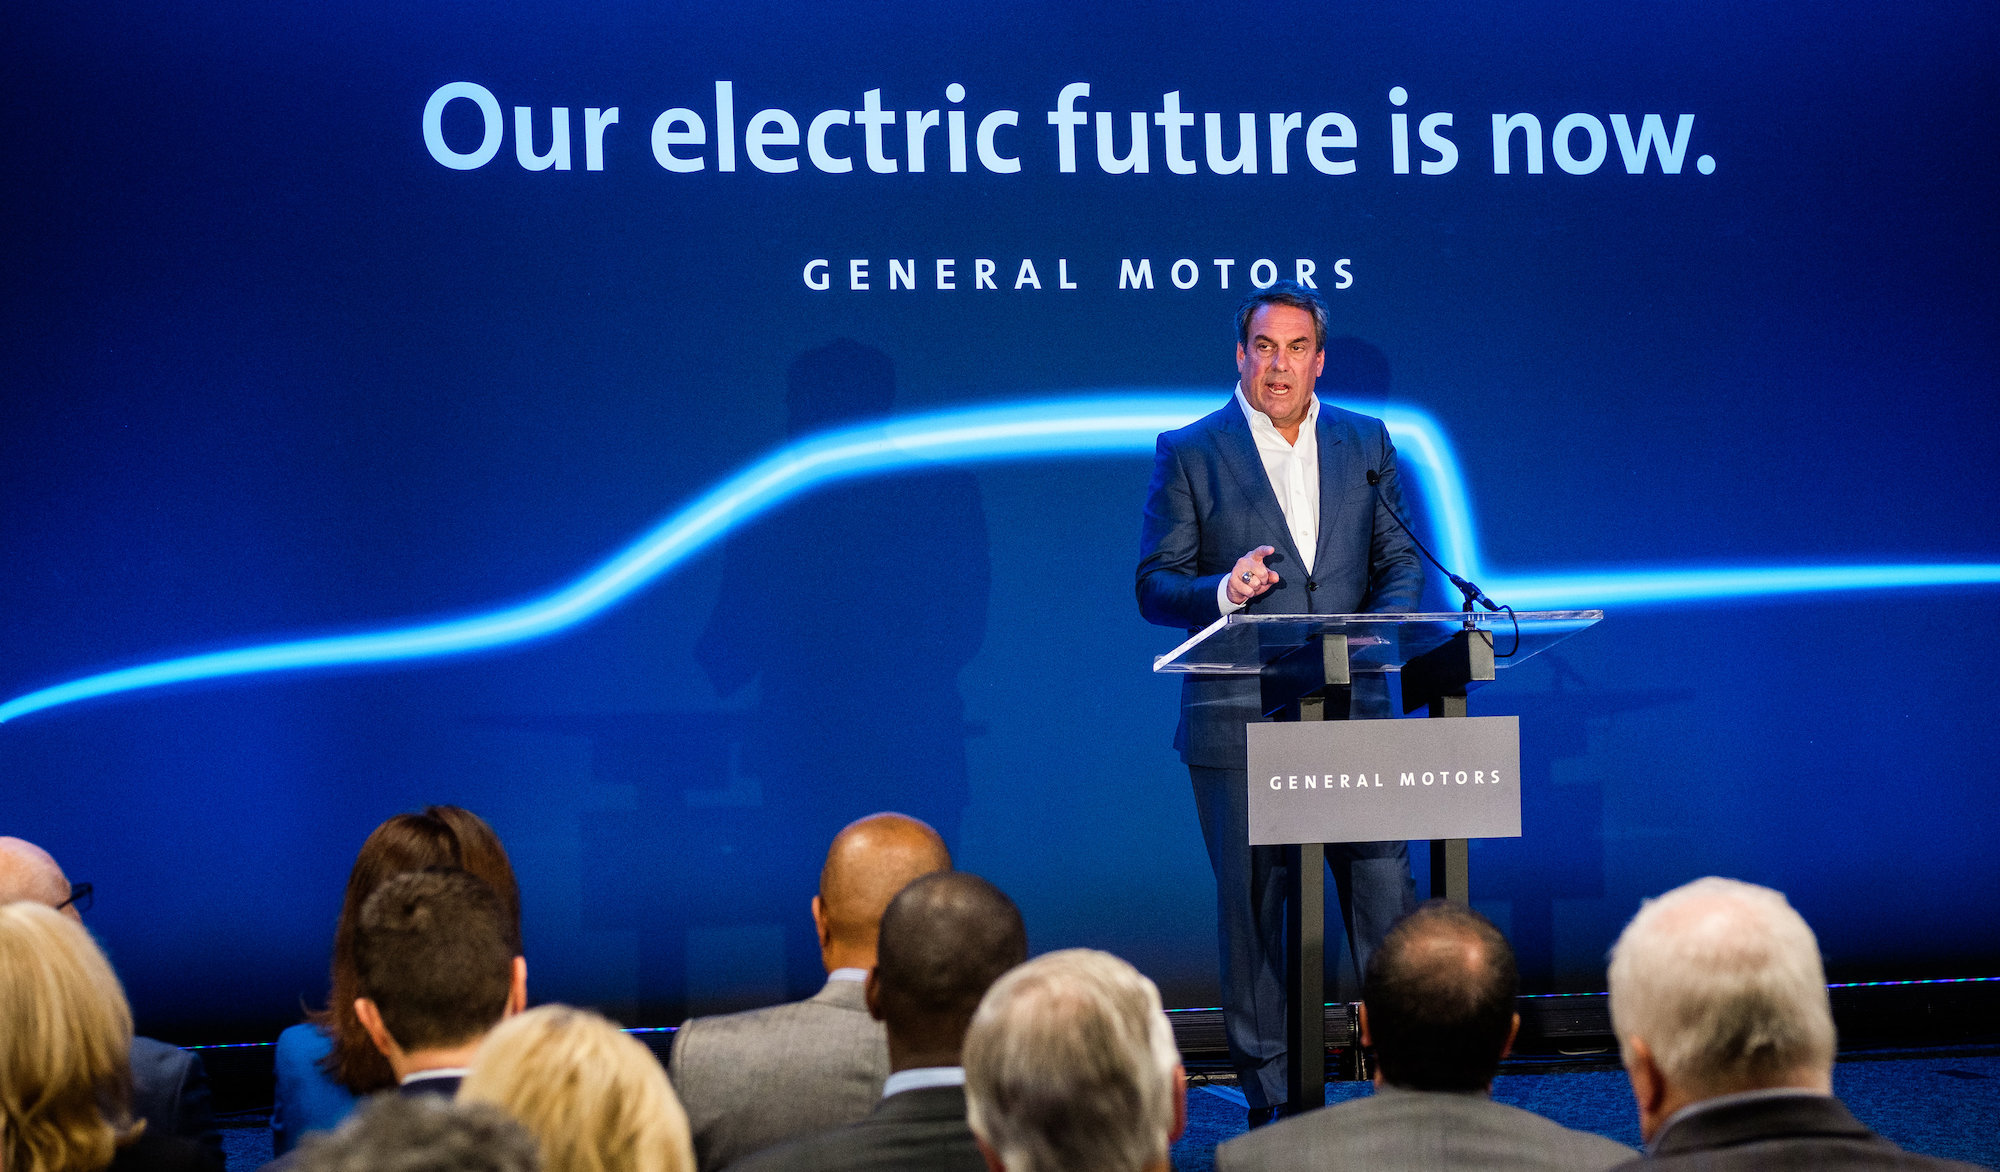 General Motors President Mark Reuss announces on January 27, 2020, a $2.2 billion investment at its Detroit- Hamtramck (MI) assembly plant to produce a variety of all-electric trucks and SUVs.